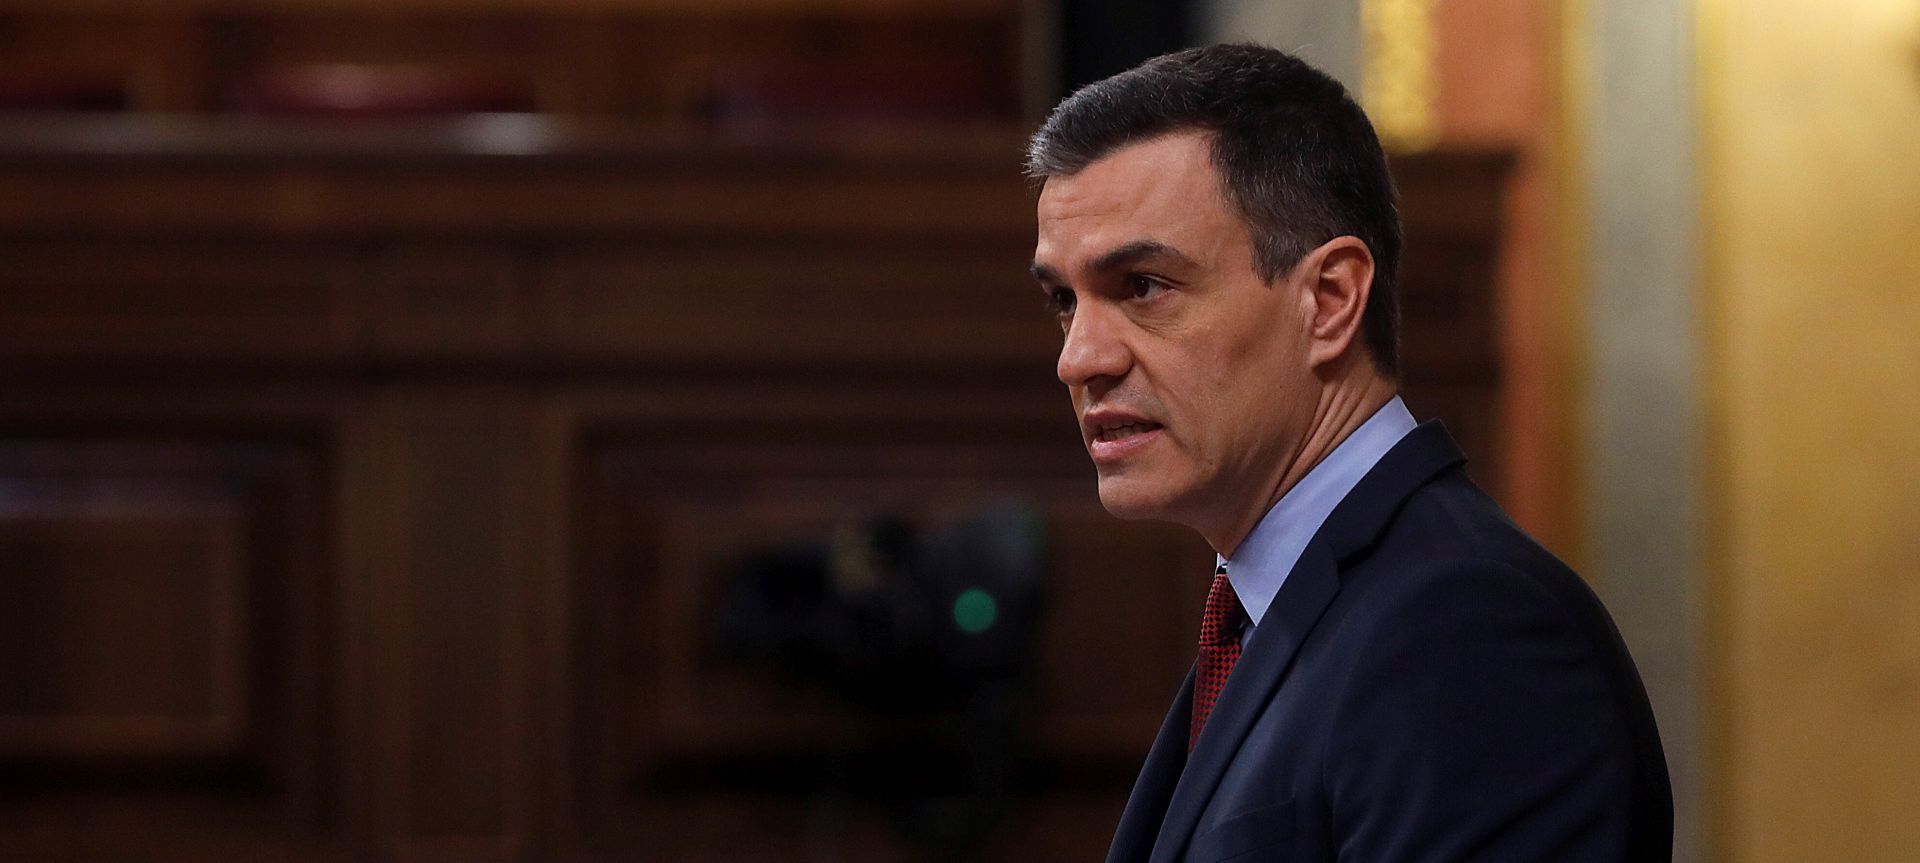 epa08376602 Spanish Prime Minister Pedro Sanchez delivers a speech during a Spanish Government's question time session at the Lower Chamber of Spanish Parliament, in Madrid, Spain, 22 April 2020. The government will expound the results of the latest European Council meetings and the reasons to ask for a new extension of the state of alarm declared amid the coronavirus pandemic.  EPA/J.J. GUILLEN